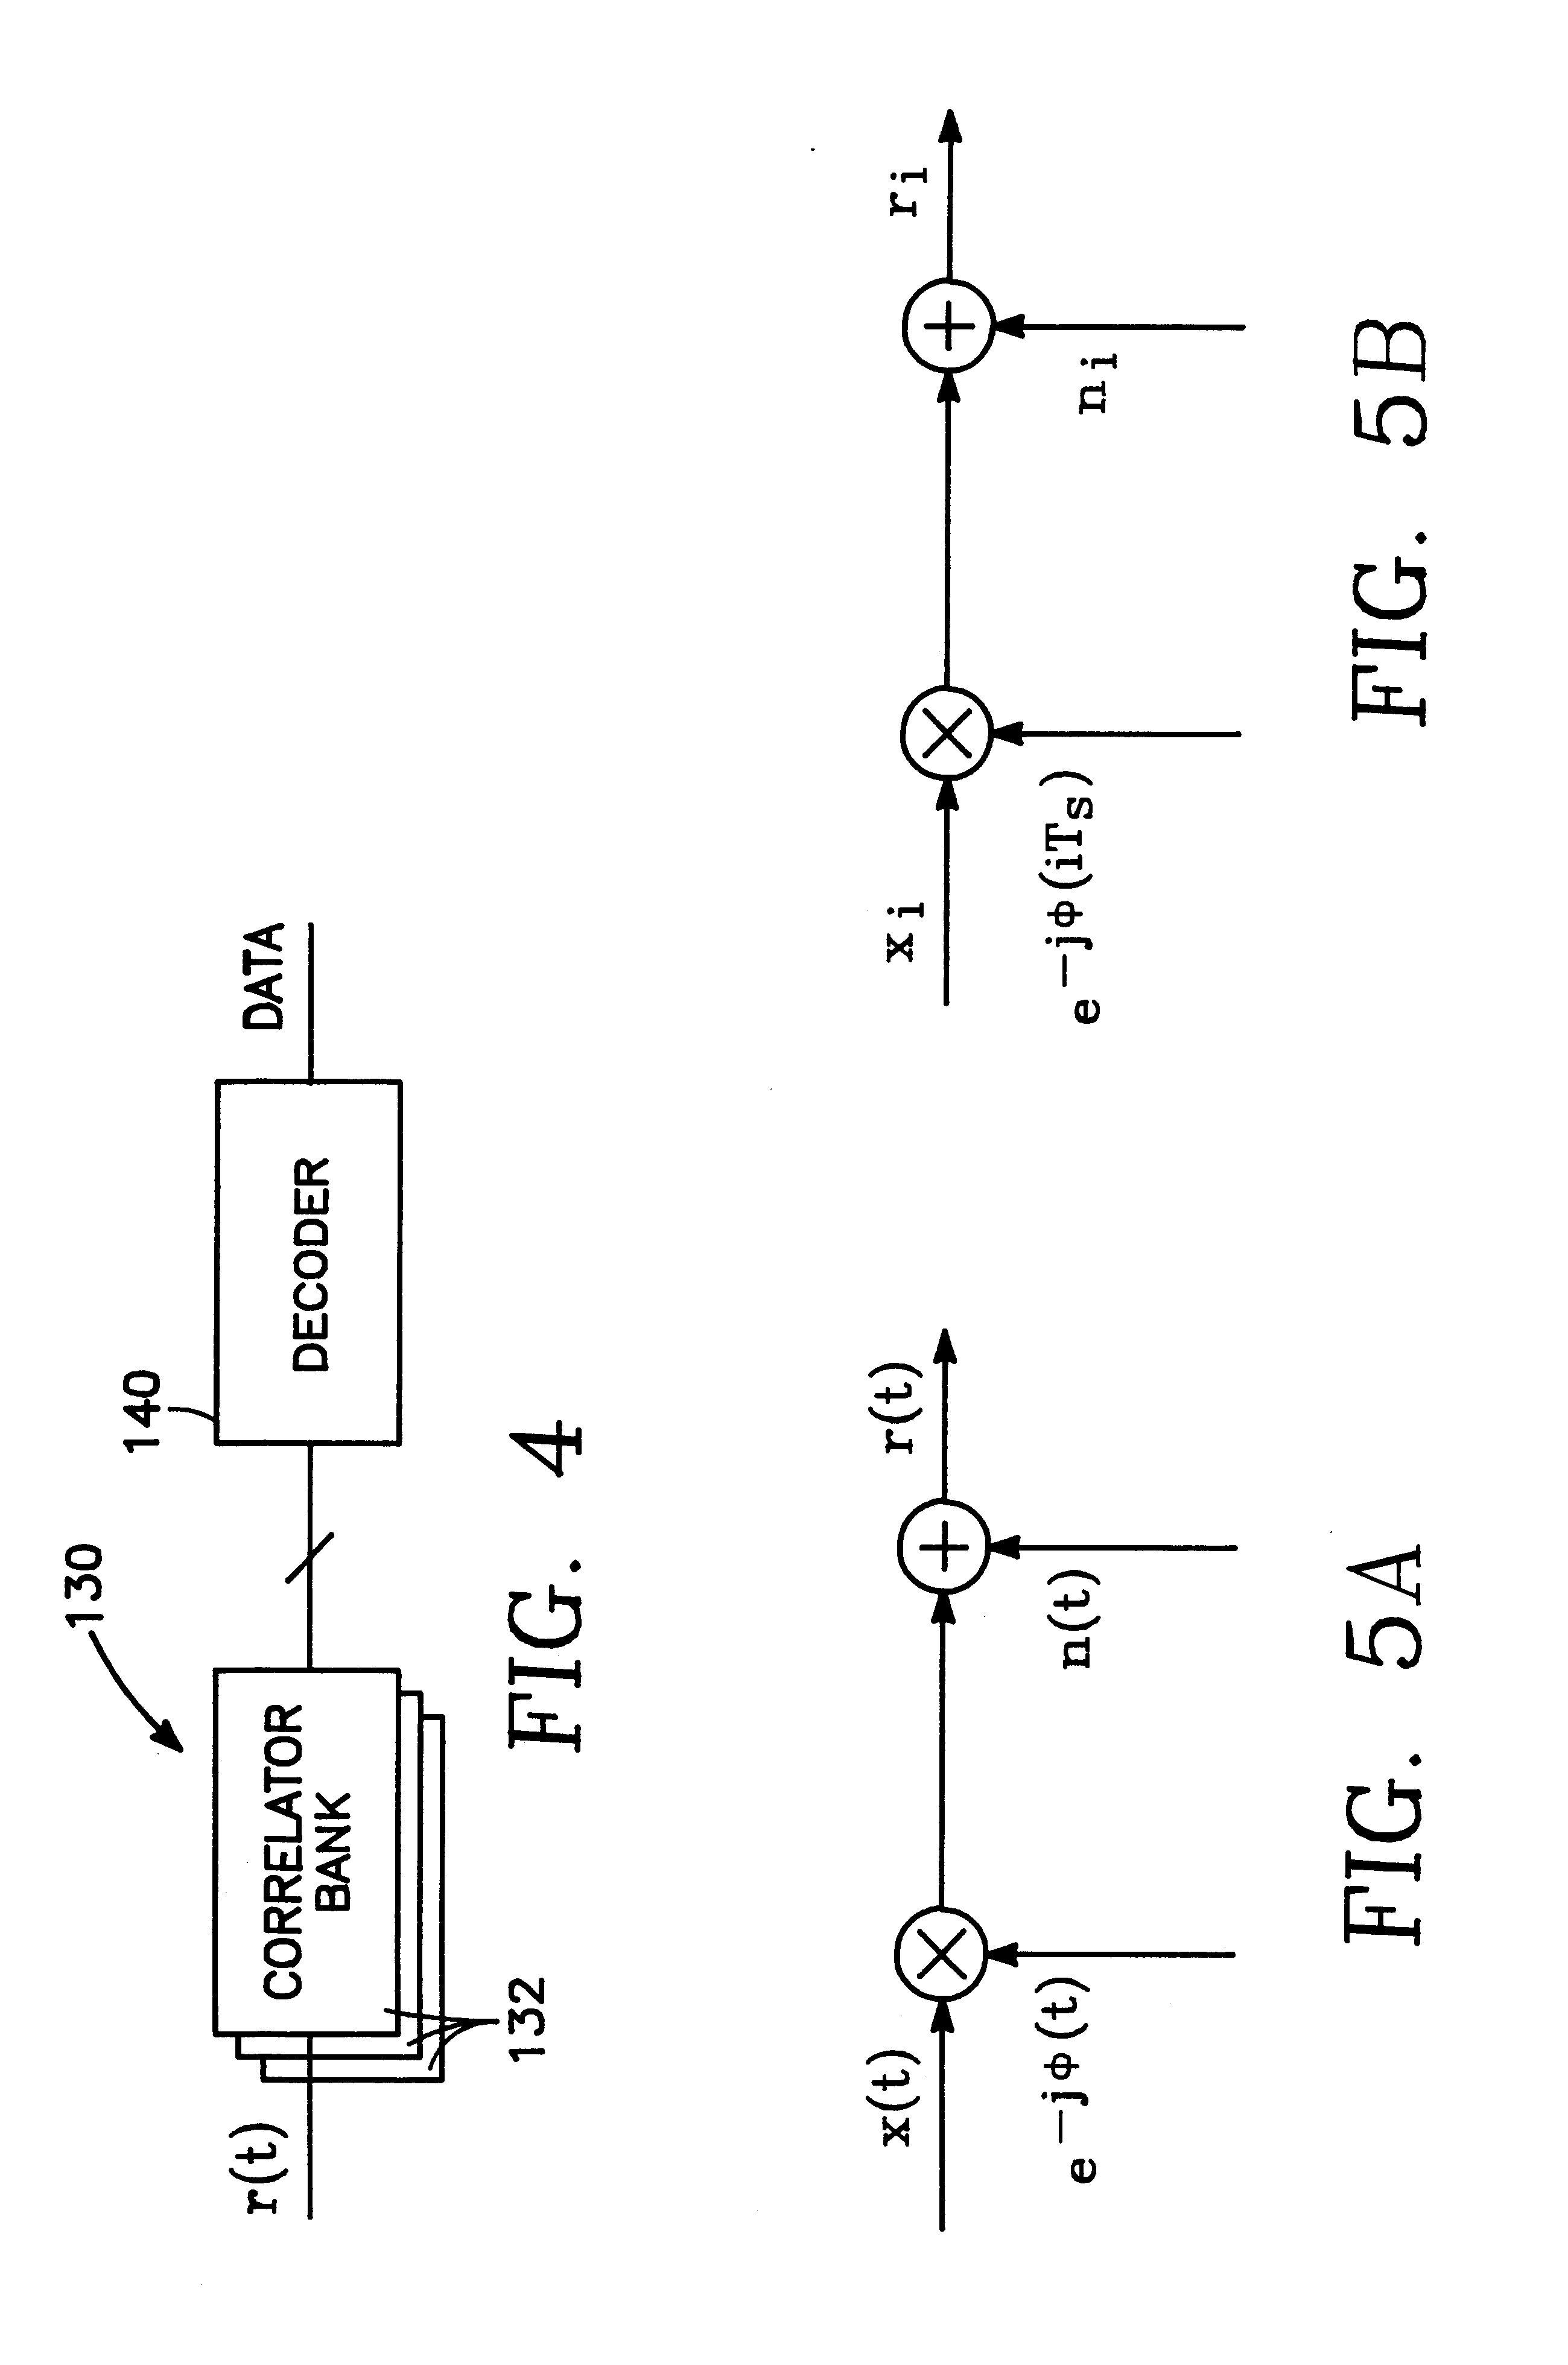 Method for noncoherent coded modulation